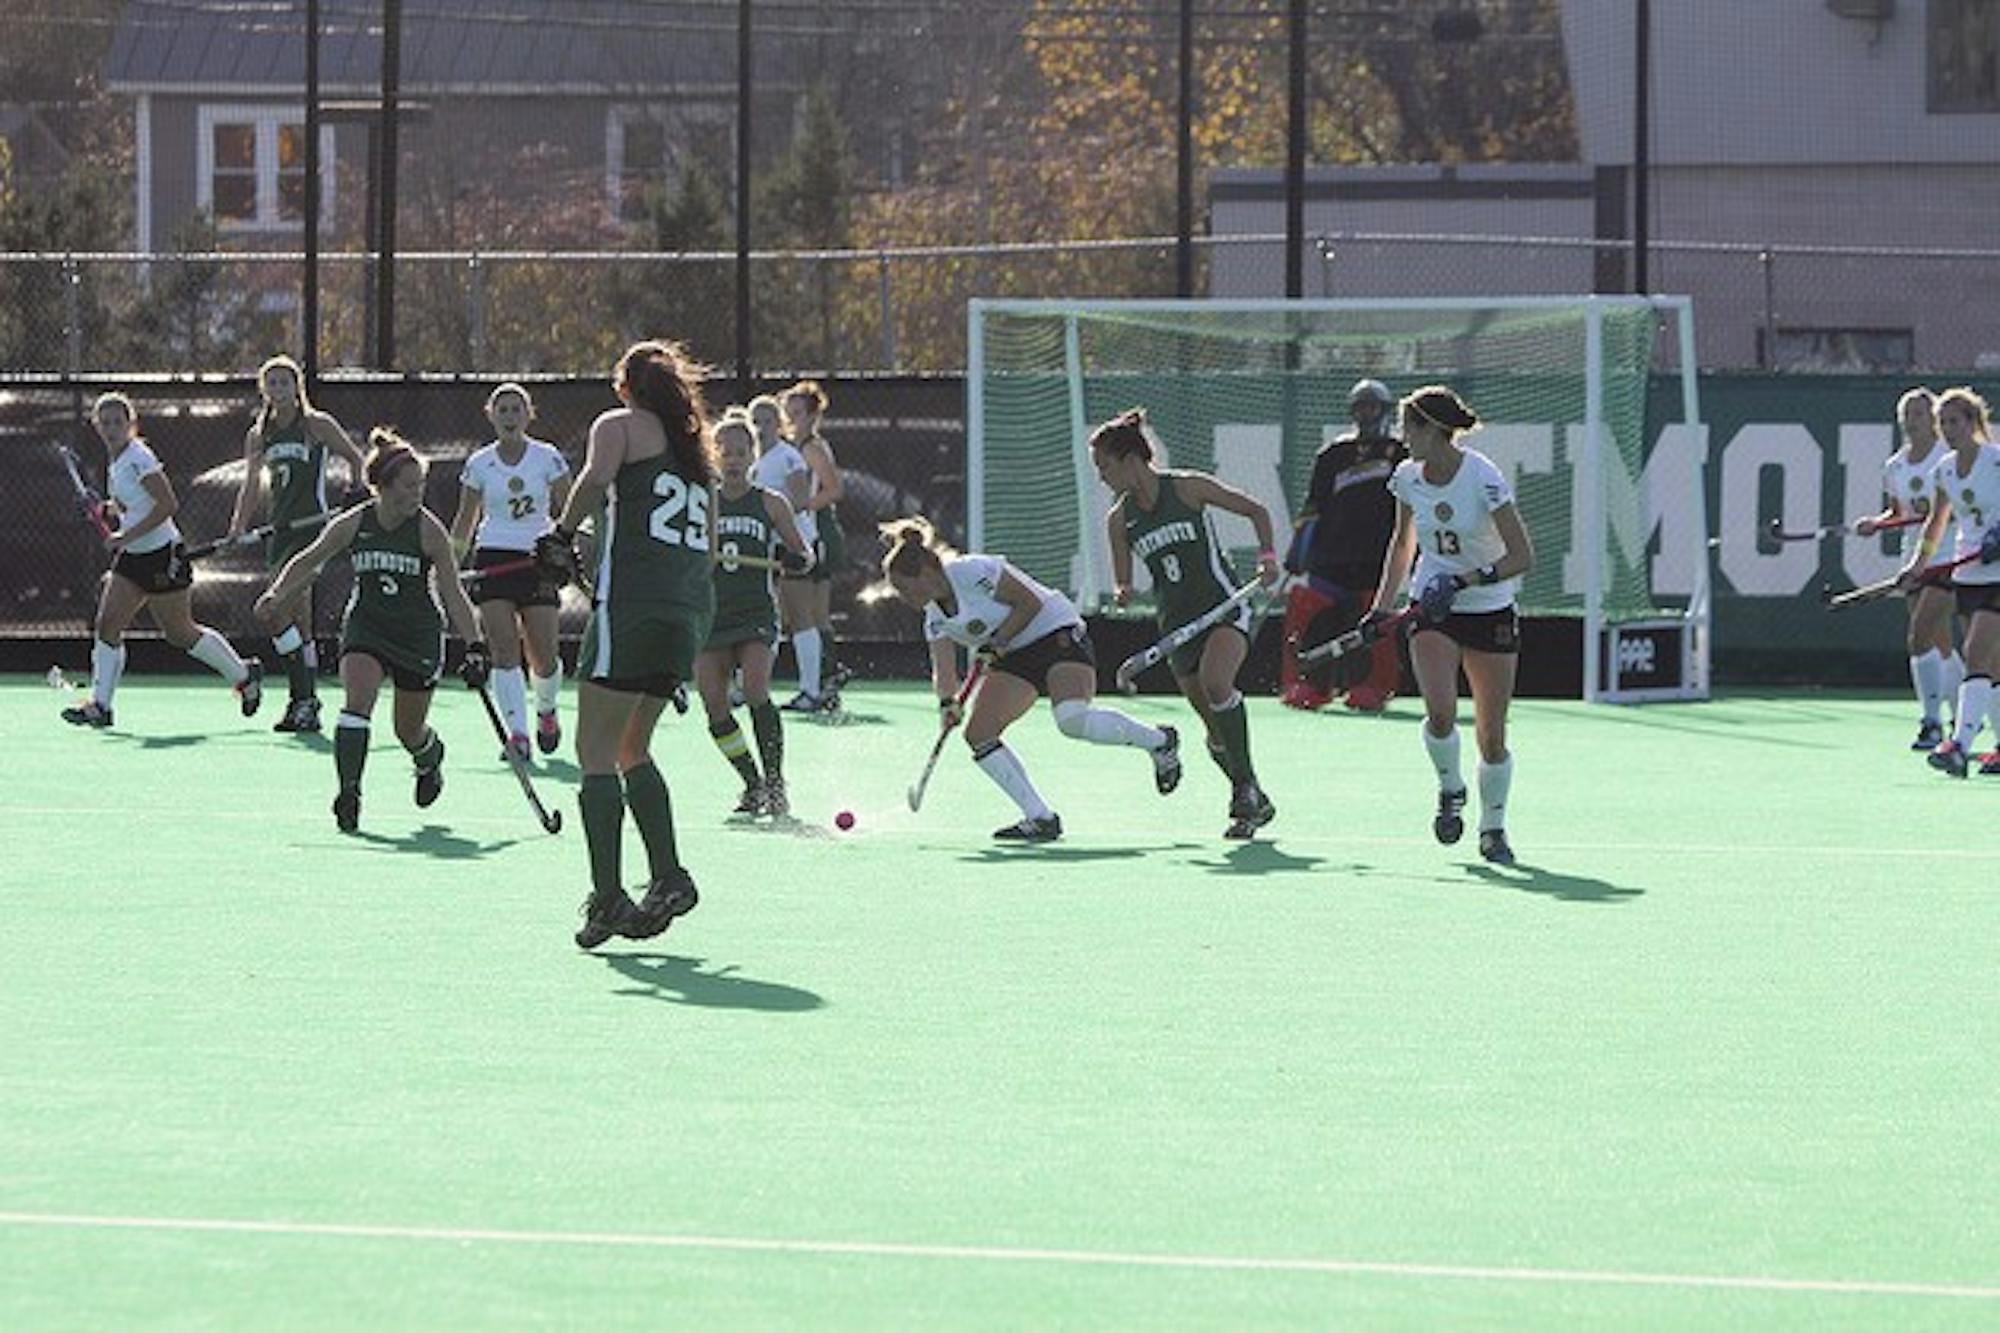 The Dartmouth field hockey team scored three unanswered goals in the second half to secure a 5-2 win over Columbia University on Sunday afternoon.